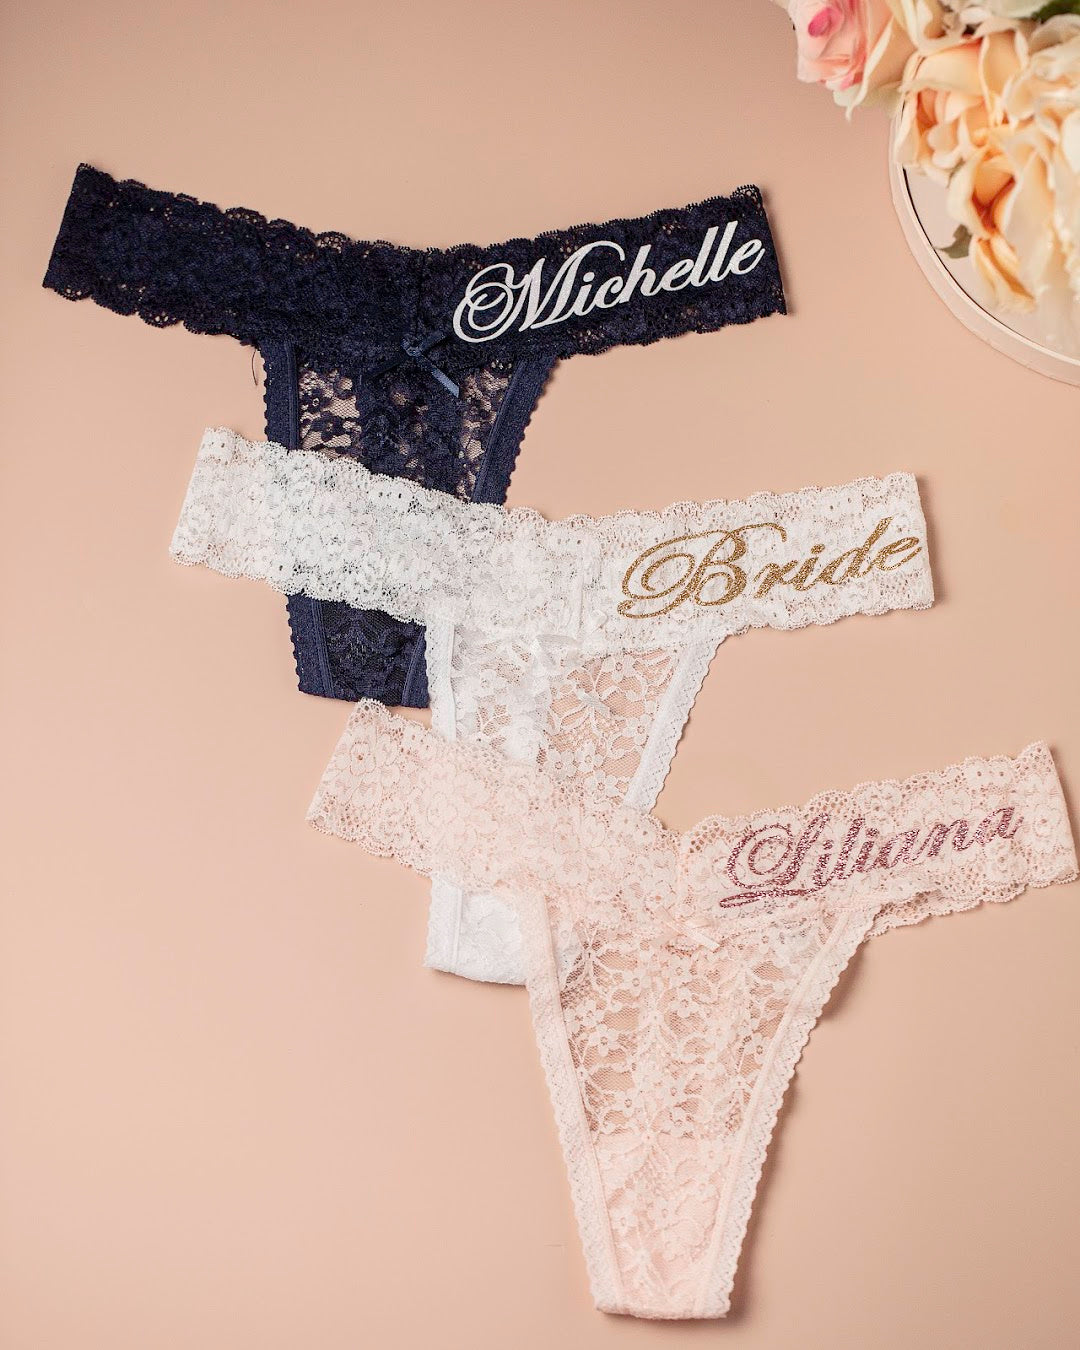 Personalize a Victoria Secret Lace Pink Thong FAST SHIPPING Wife,  Girlfriend, Bridal Shower Gift, Gift for Him, Bachelorette Gift -   Canada